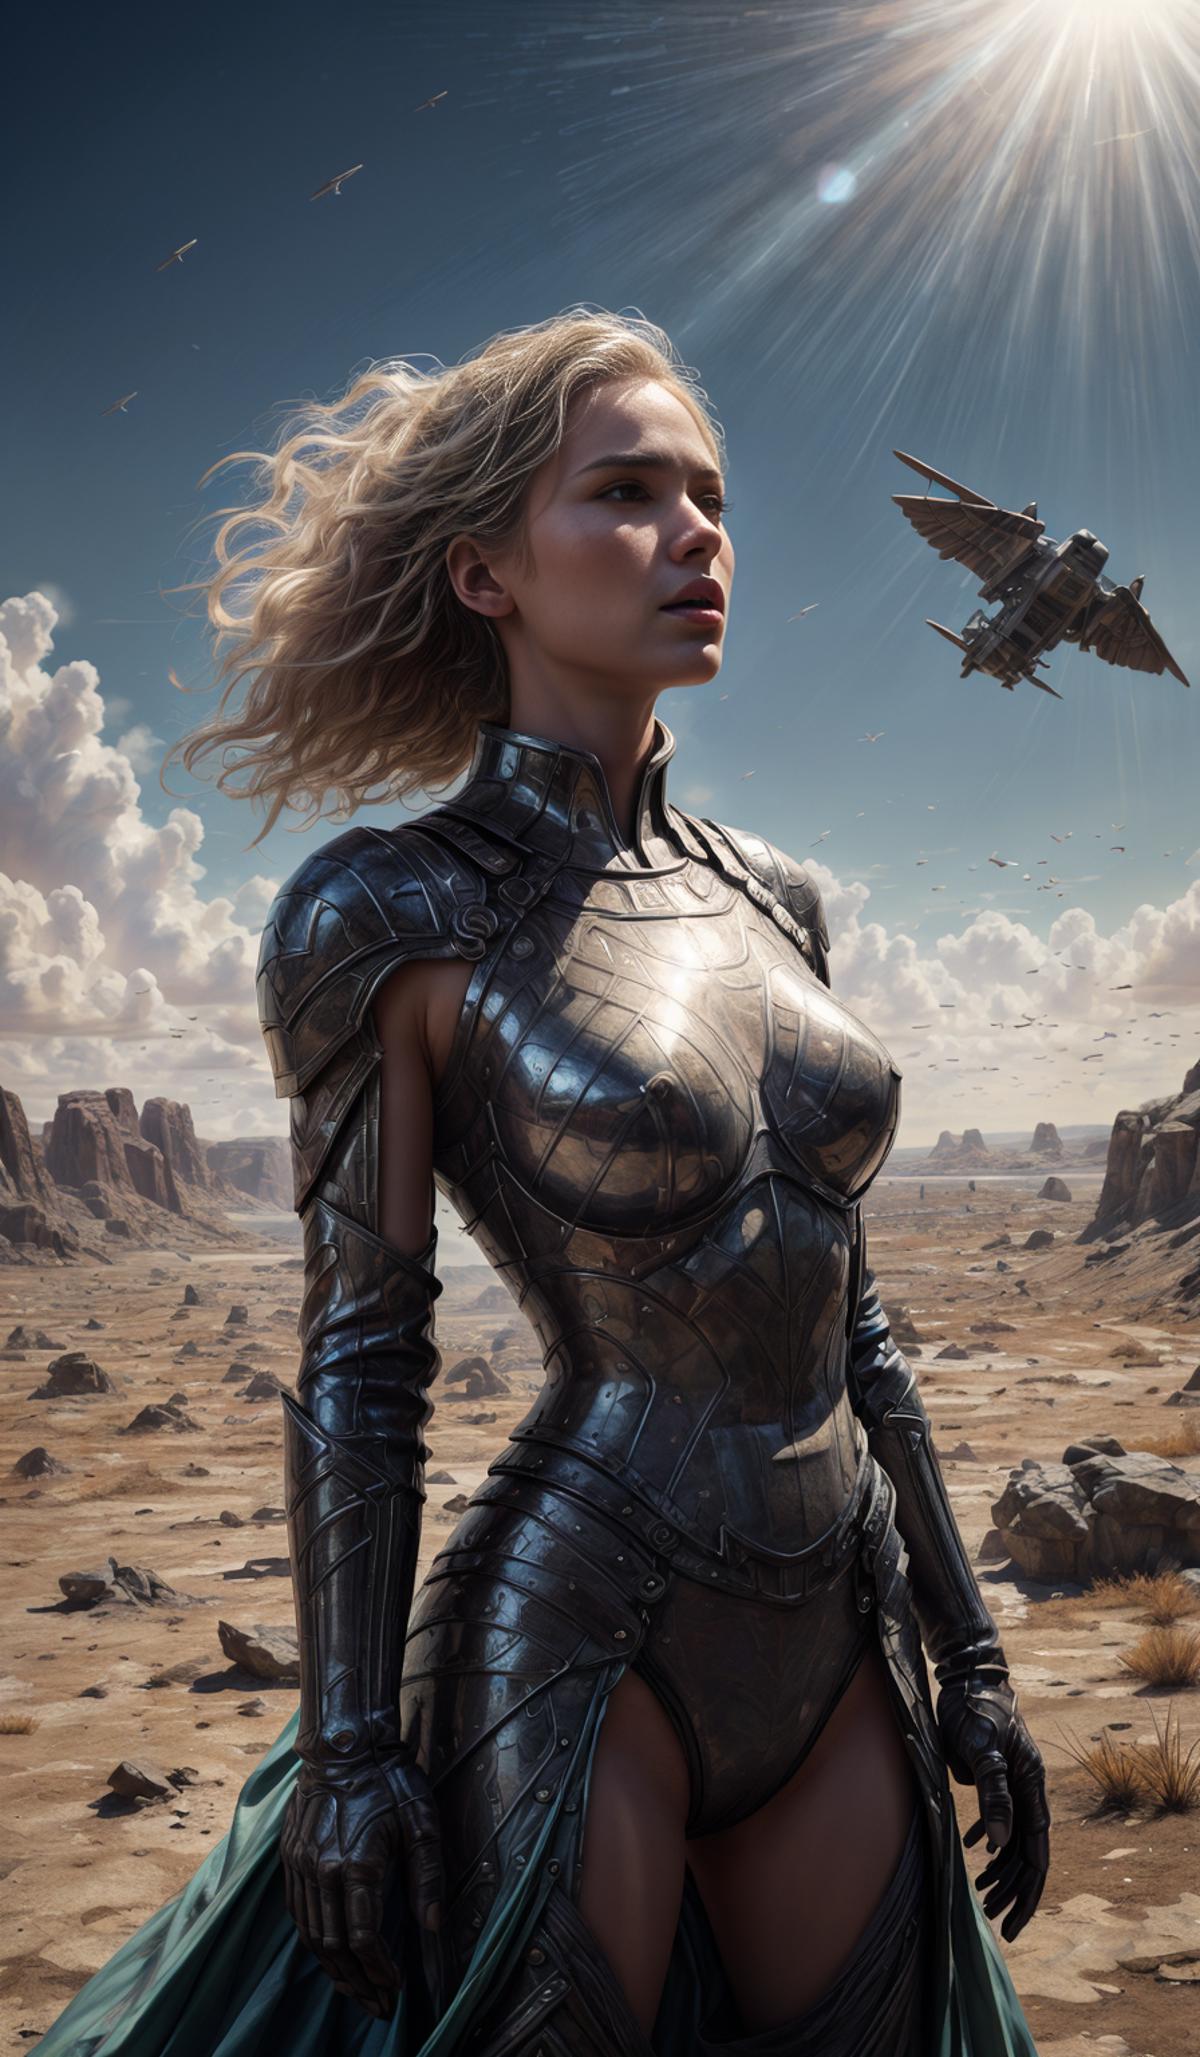 A woman in a silver armor standing in a desert landscape with an airplane in the background.